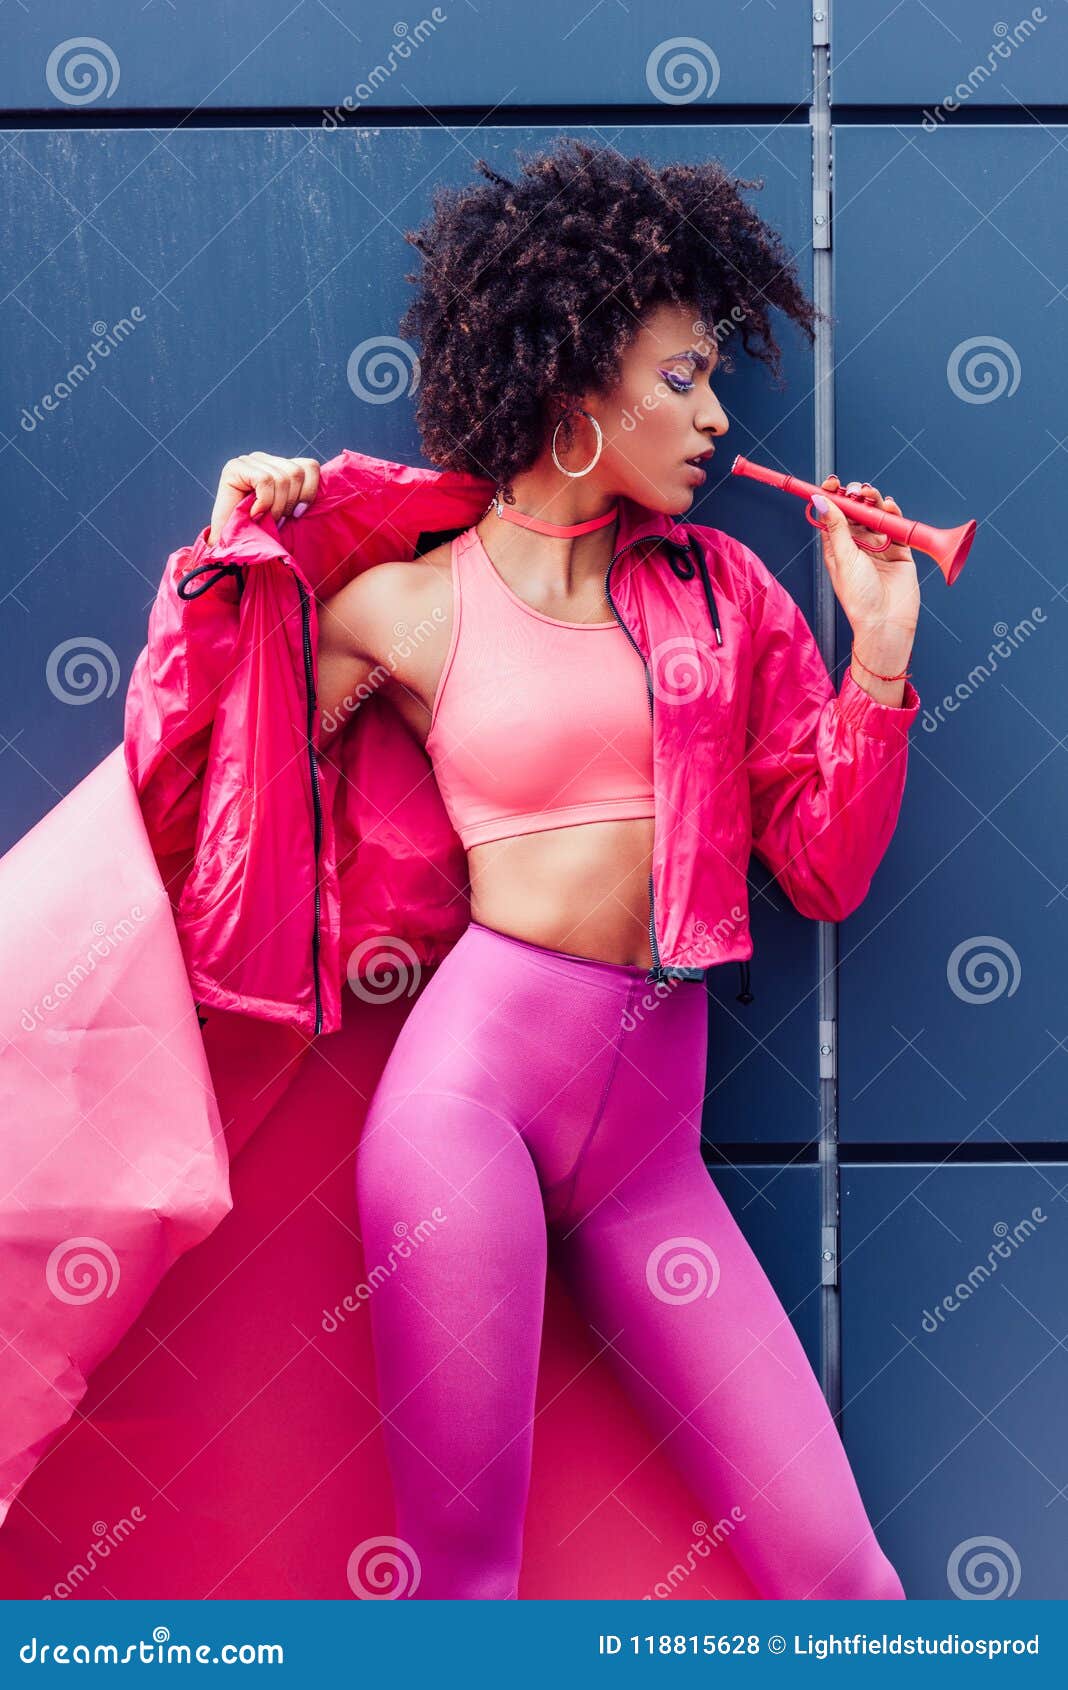 https://thumbs.dreamstime.com/z/fashionable-african-american-girl-horn-posing-s-style-clothes-pink-paper-fashionable-african-american-girl-horn-118815628.jpg